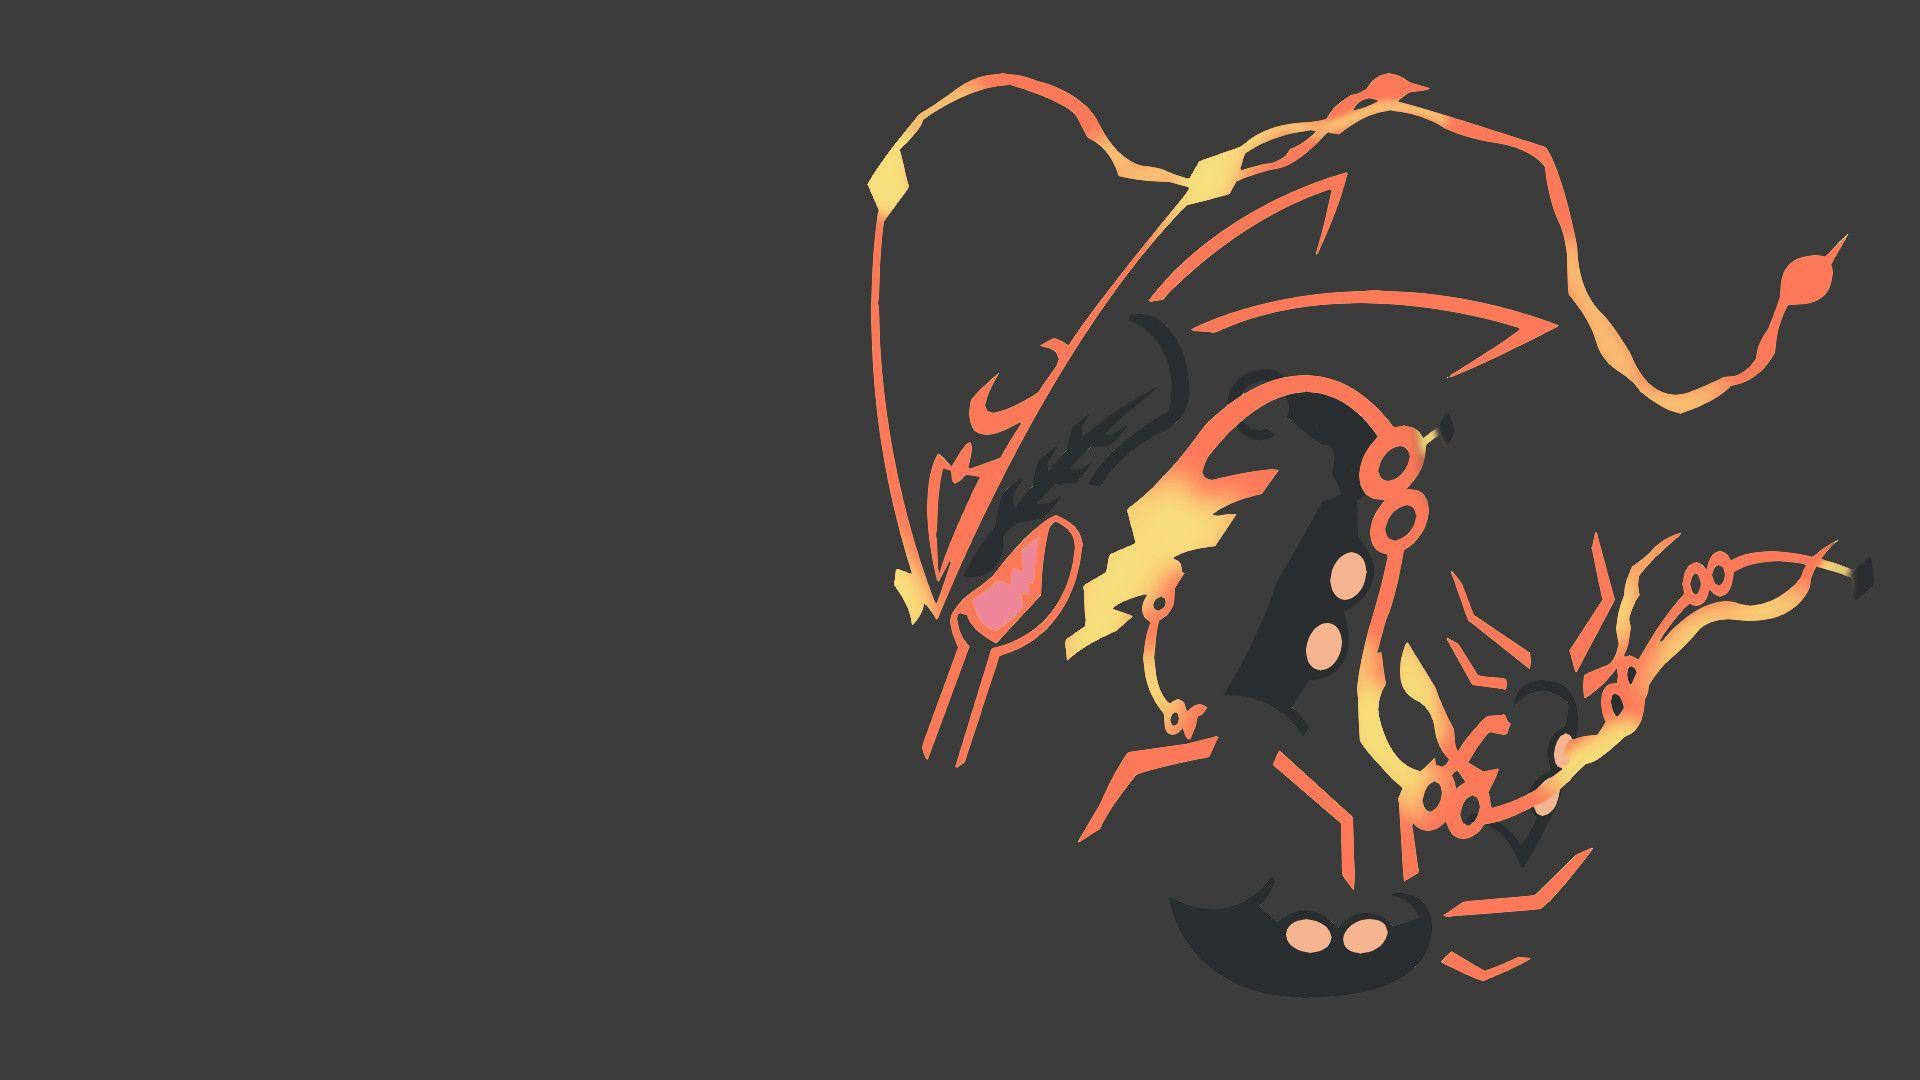 Tons of awesome shiny rayquaza wallpapers to download for free. 